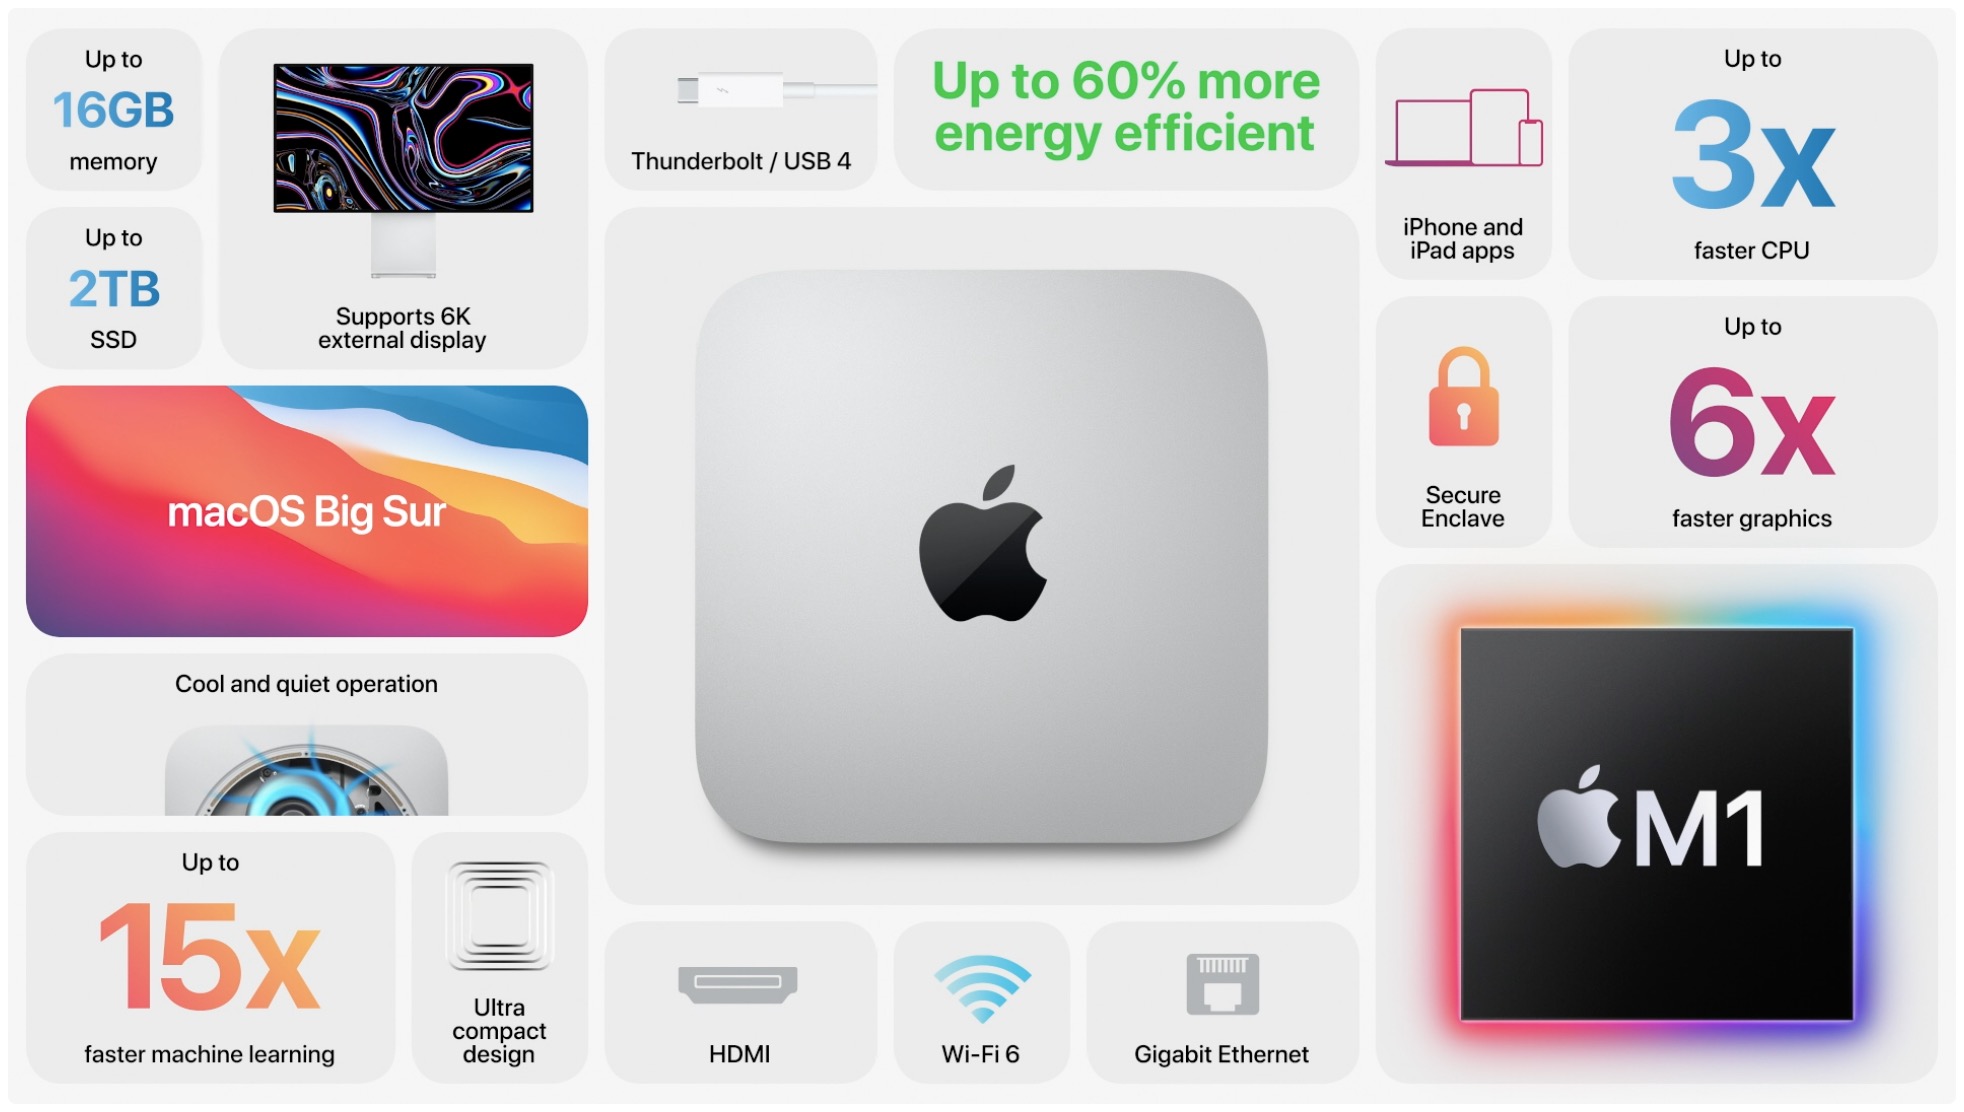 A WWDC 2020 slide advertising the features of the M1-powered Mac mini computer